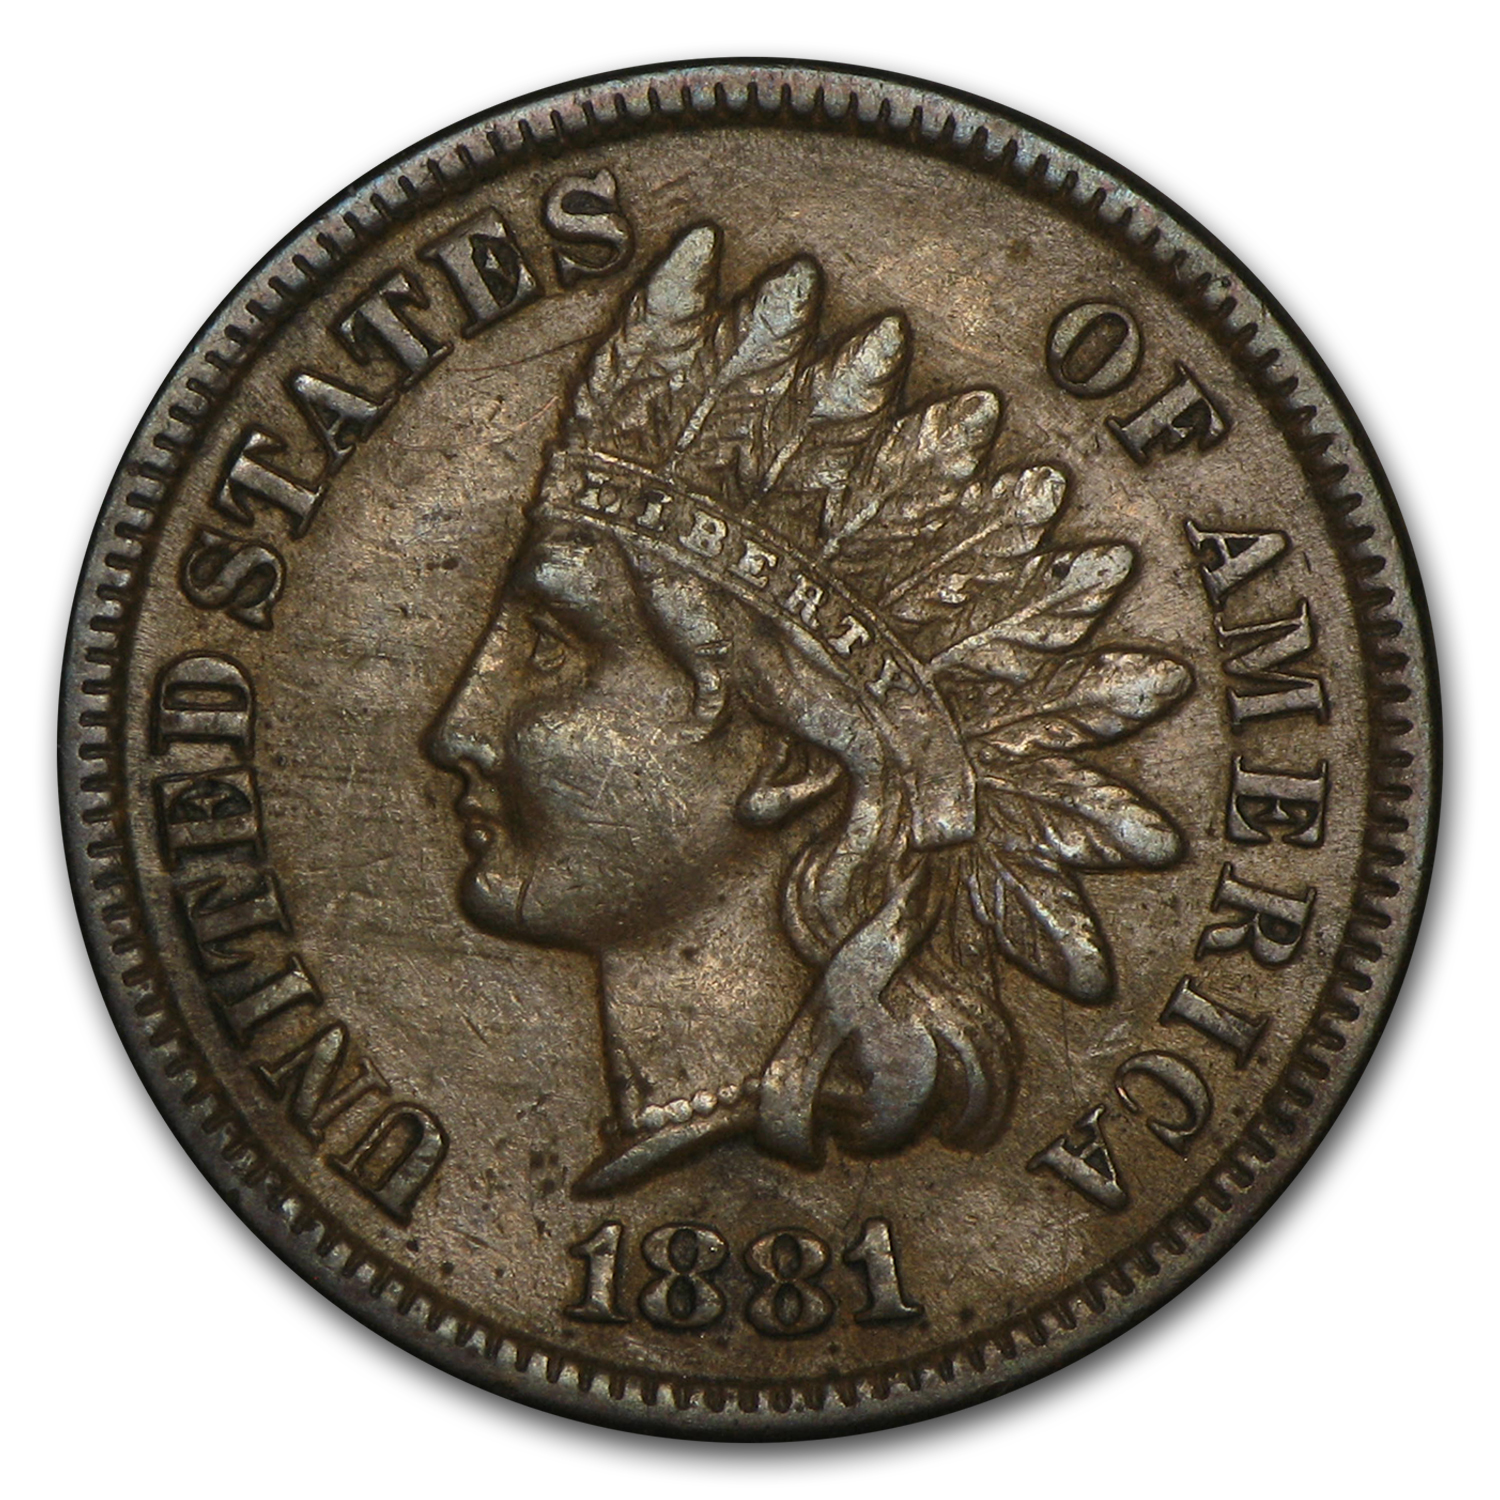 Buy 1881 Indian Head Cent XF